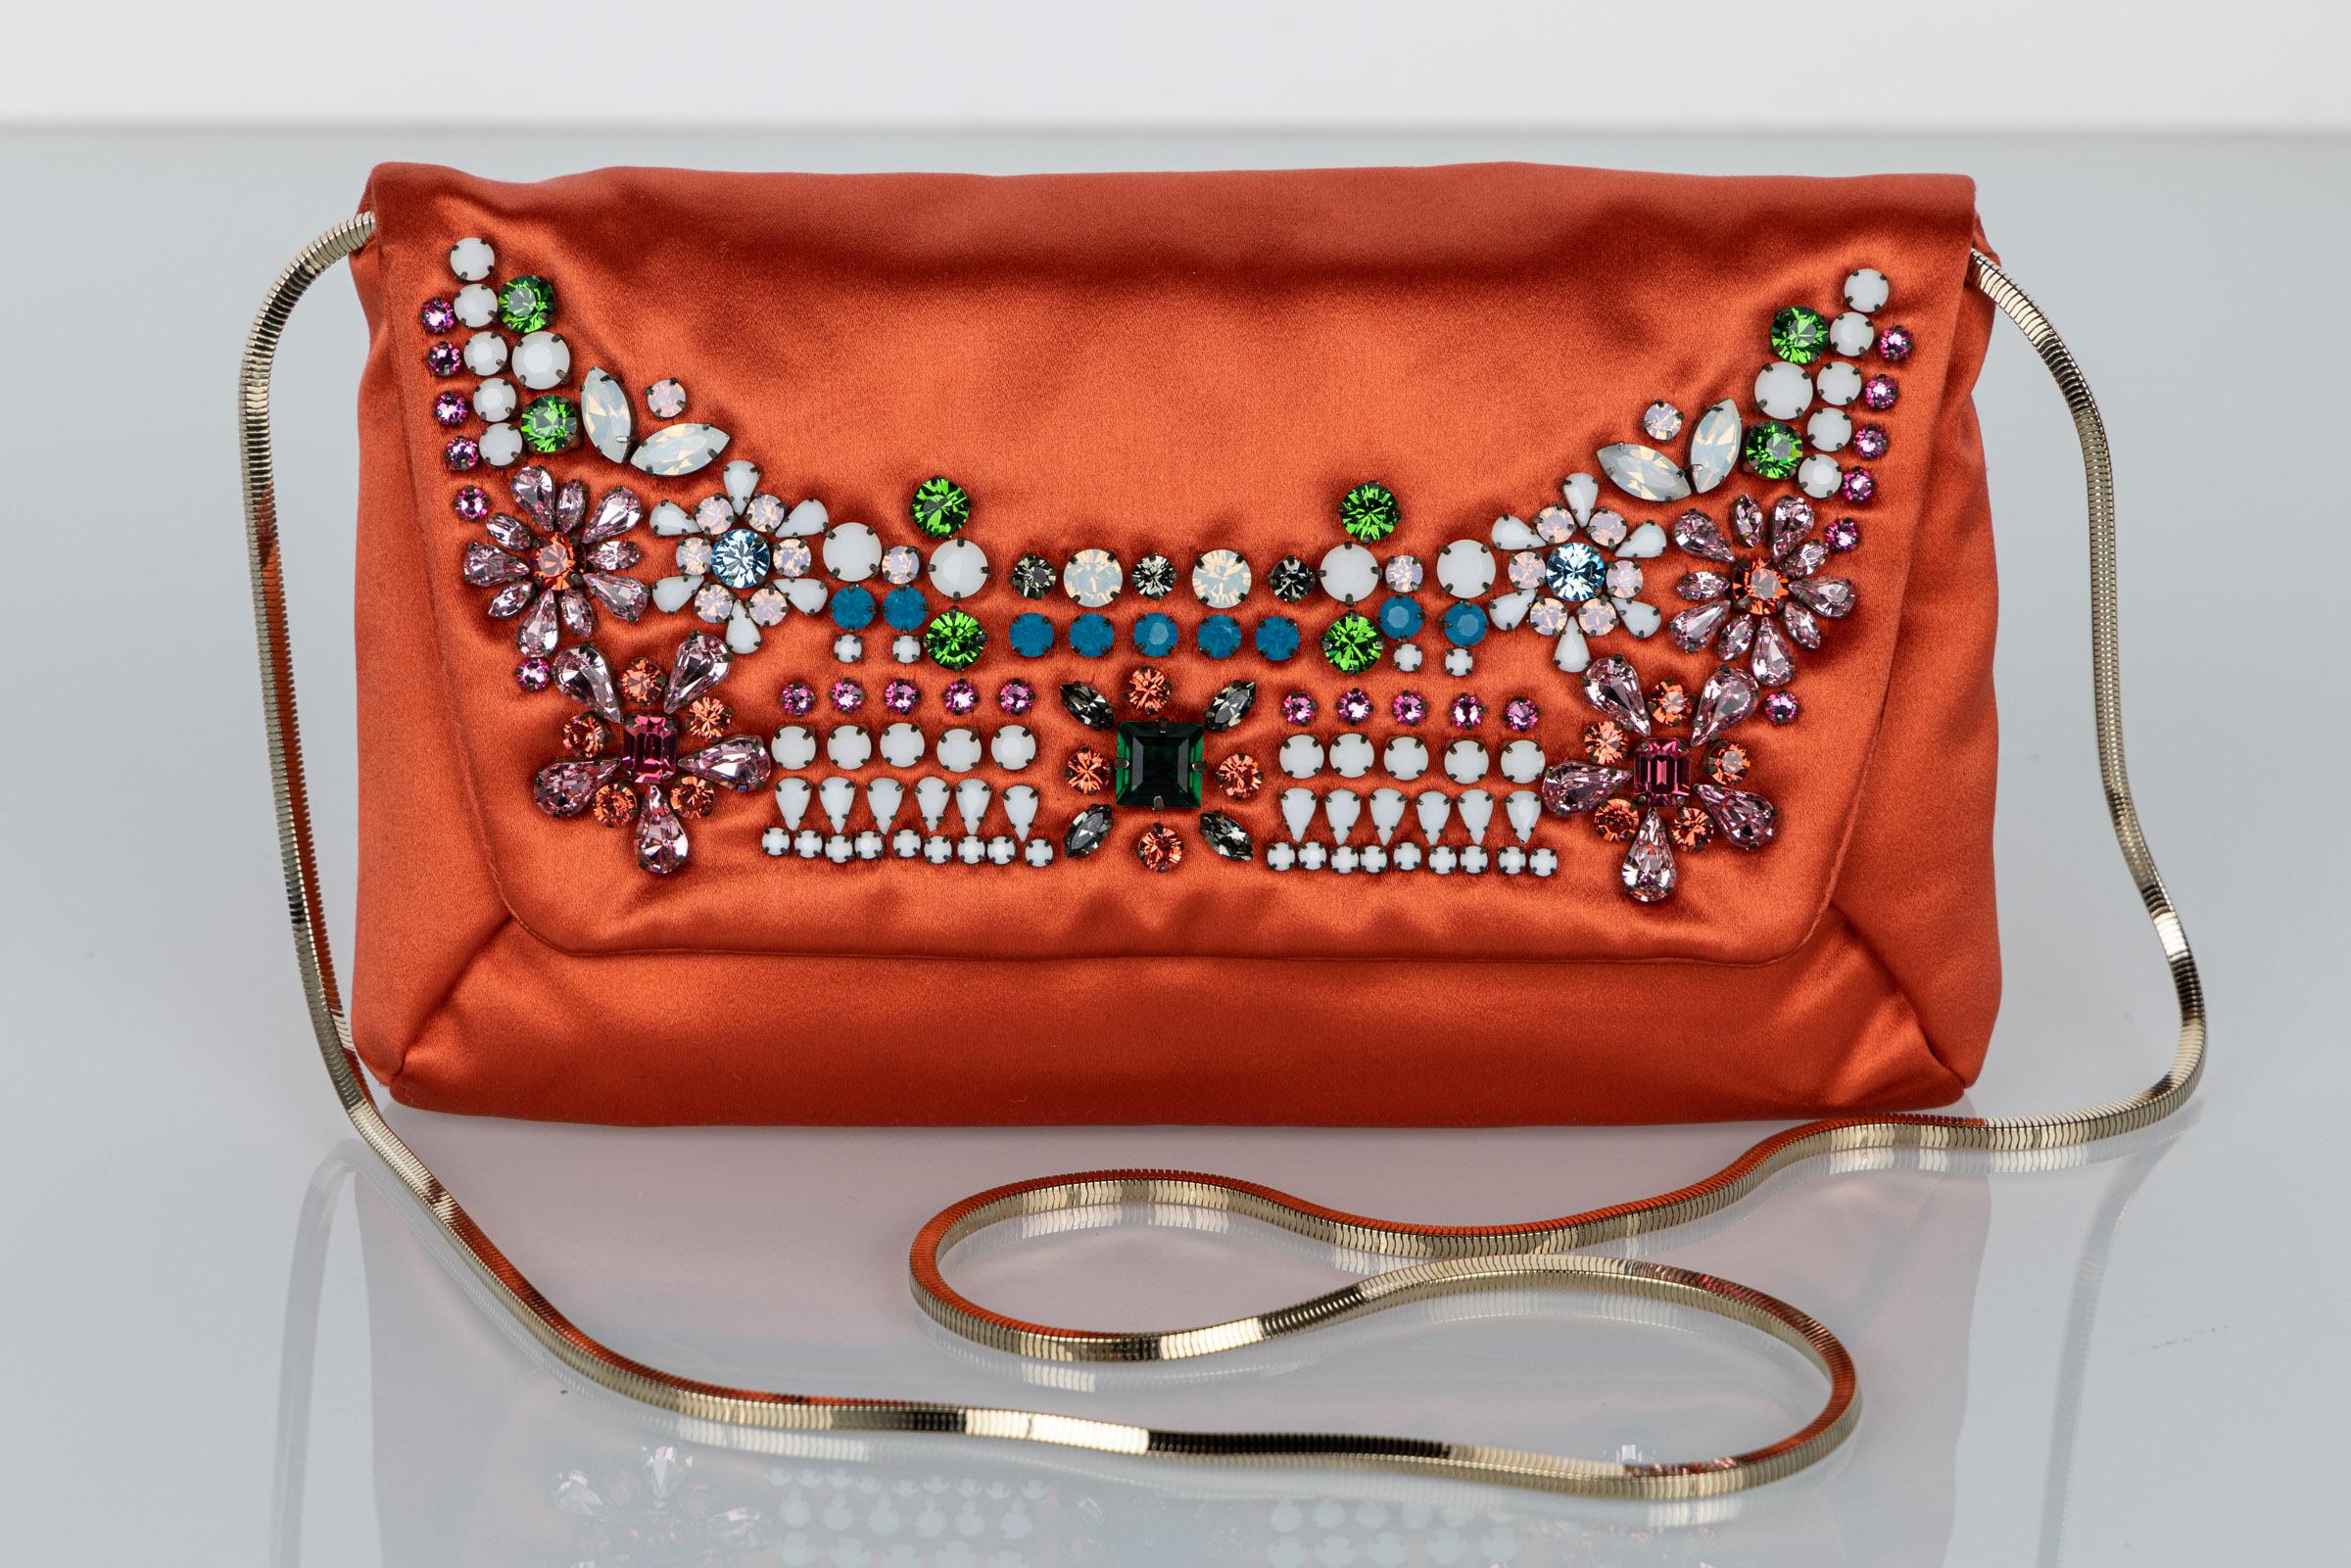 Lanvin Alber Elbaz convertible bag/Clutch. Done in coral orange, the gold sanle chain can be tucked in and used as a clutch.
The flap is embellished with dazzling prong set Swarovski crystals.
Snap closure interior is lined and trimmed with